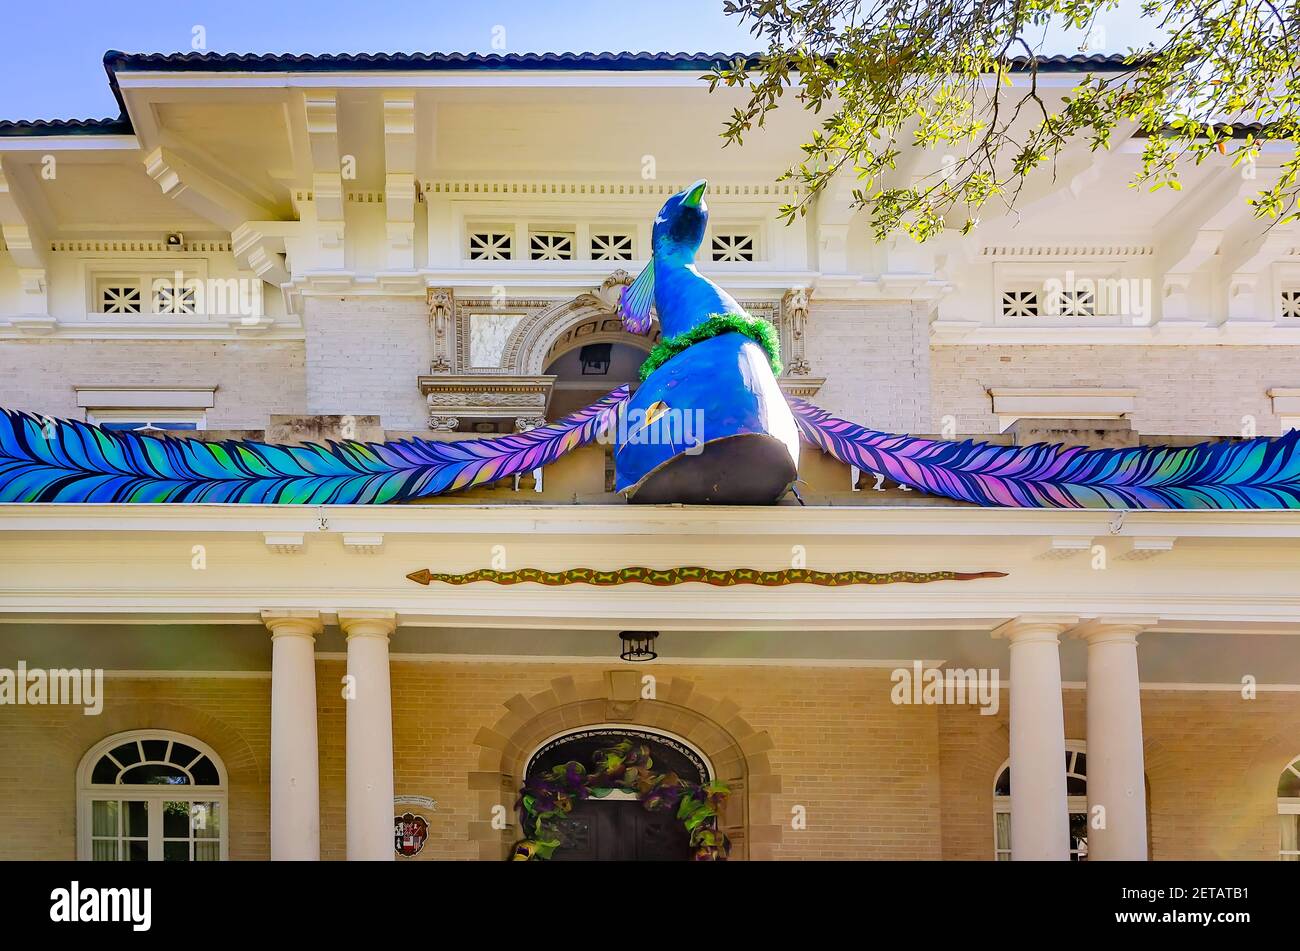 The Burgess-Maschmeyer Mansion is decorated with a peacock for Mardi Gras on Government Street, Feb. 19, 2021, in Mobile, Alabama. Stock Photo